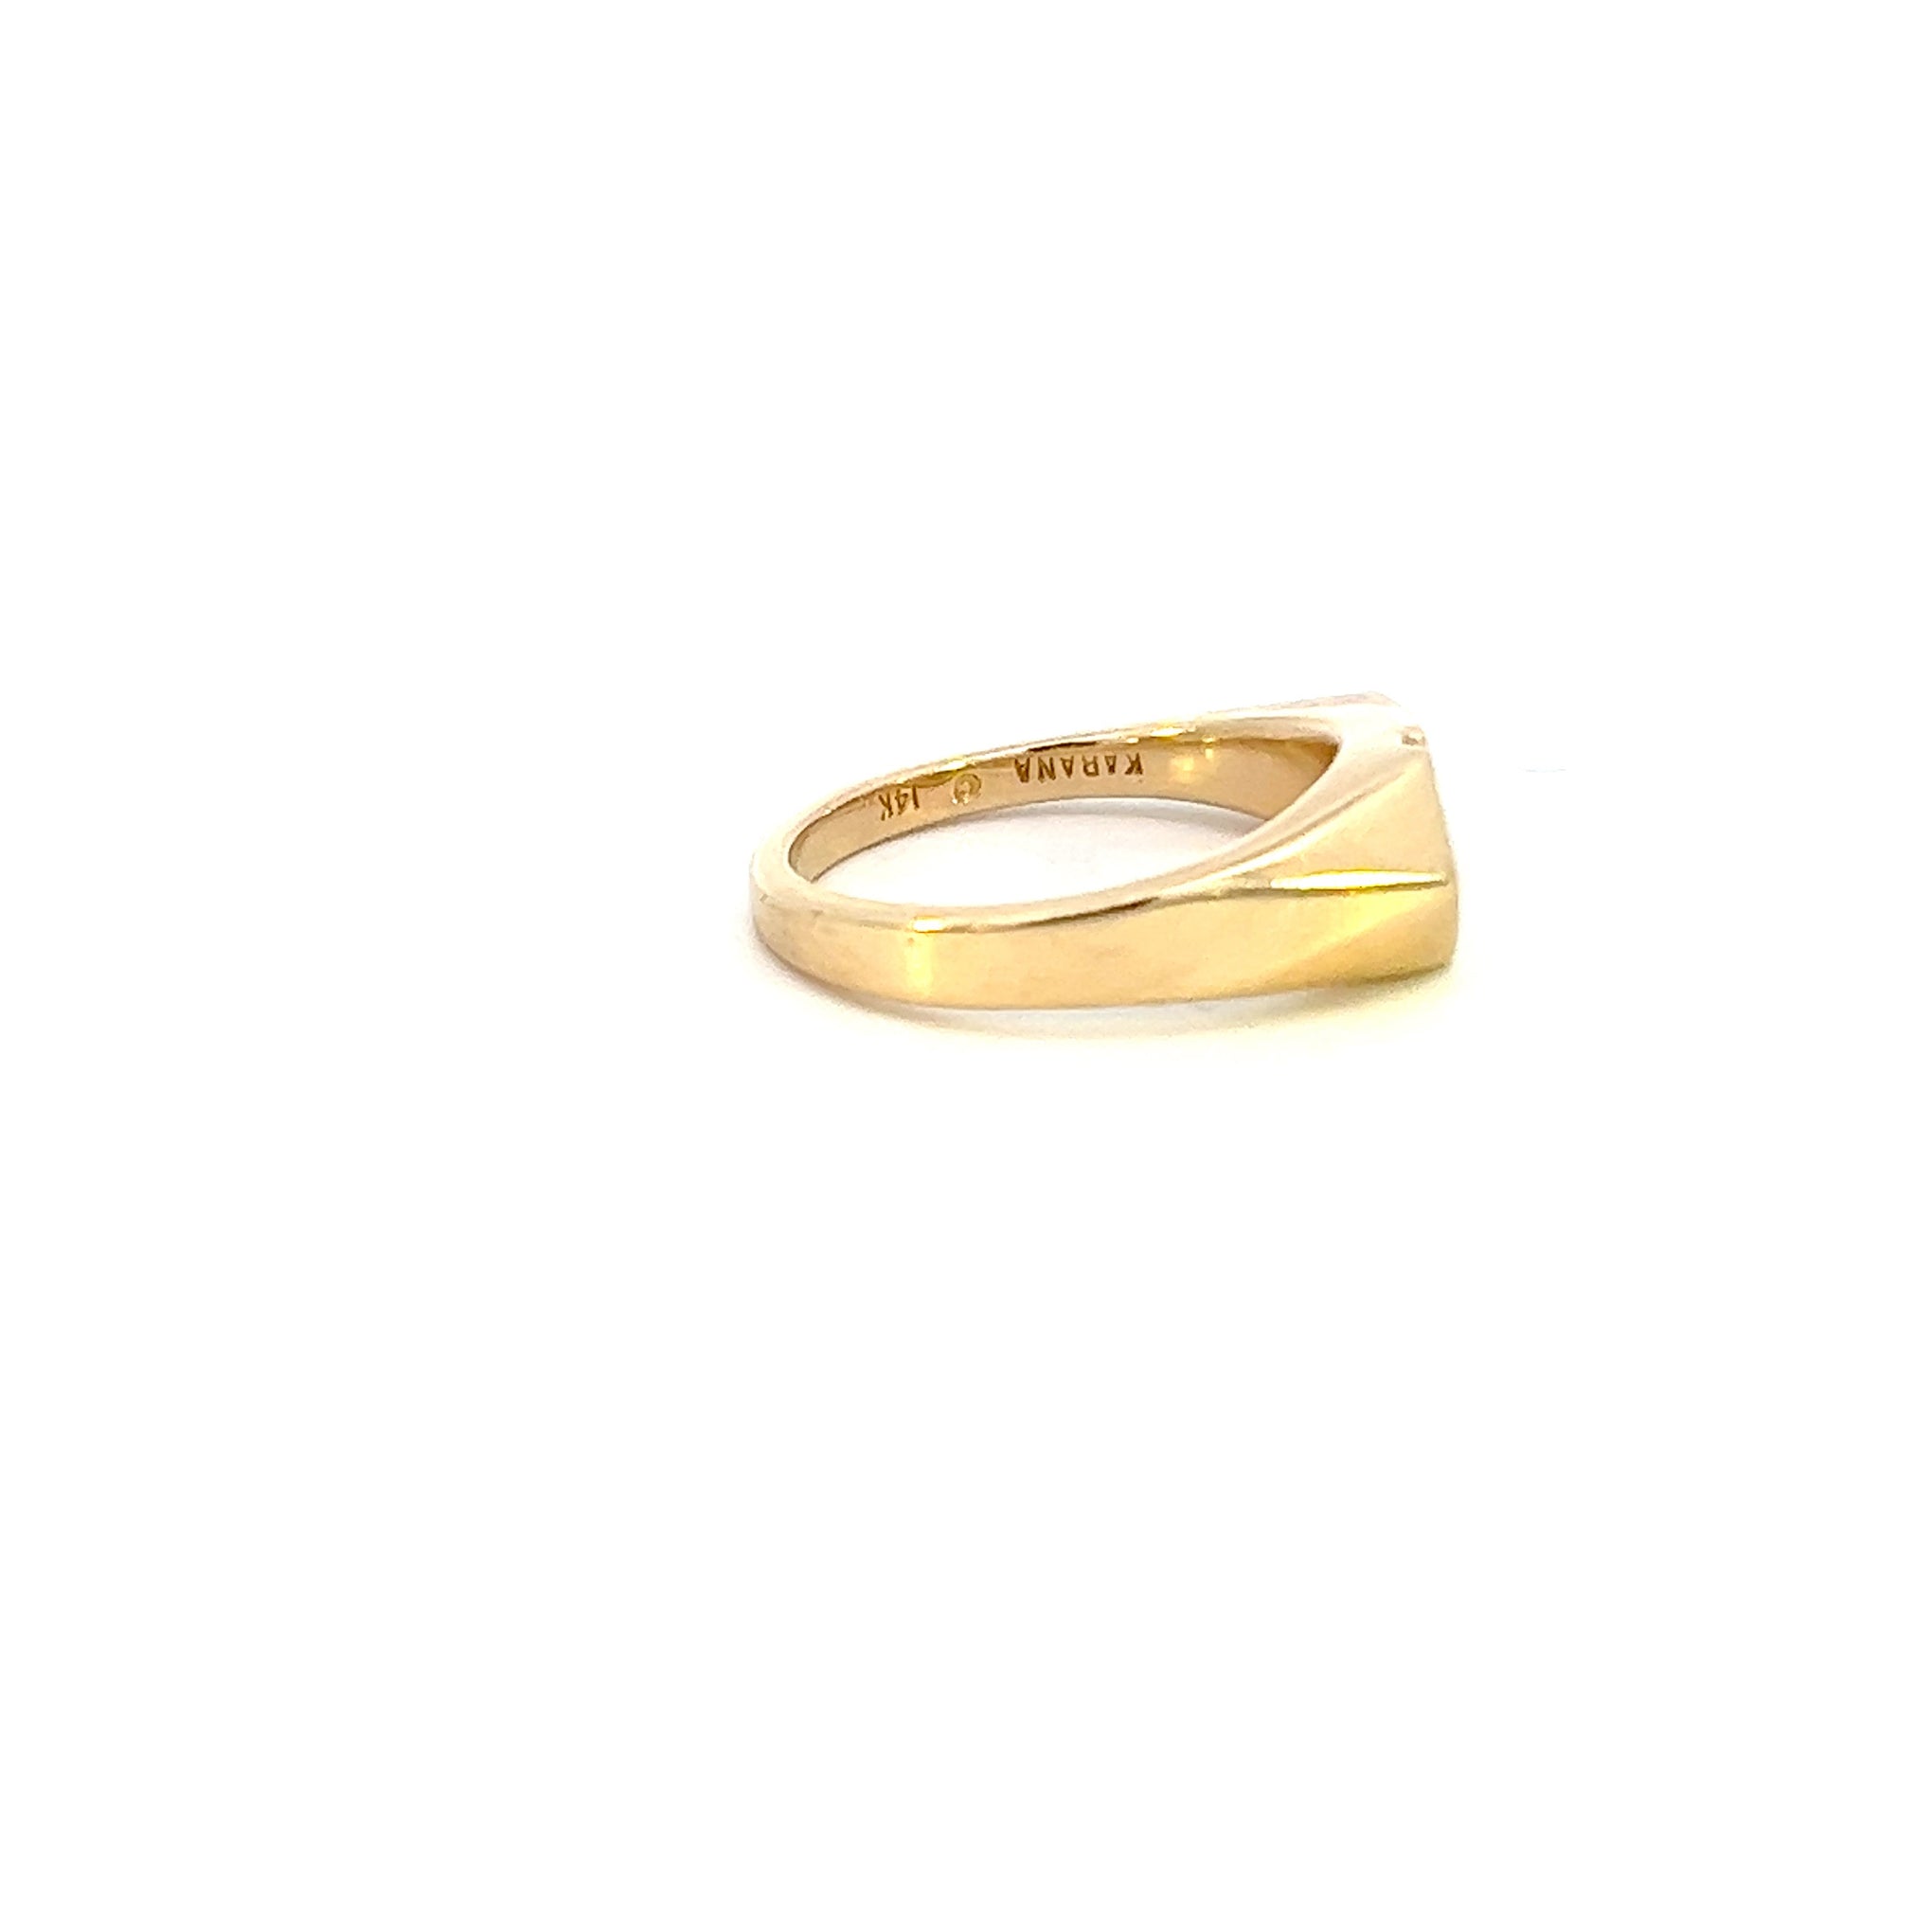 ESTATE 14KT YELLOW GOLD ROUND CUT CORAL DIAMOND RING